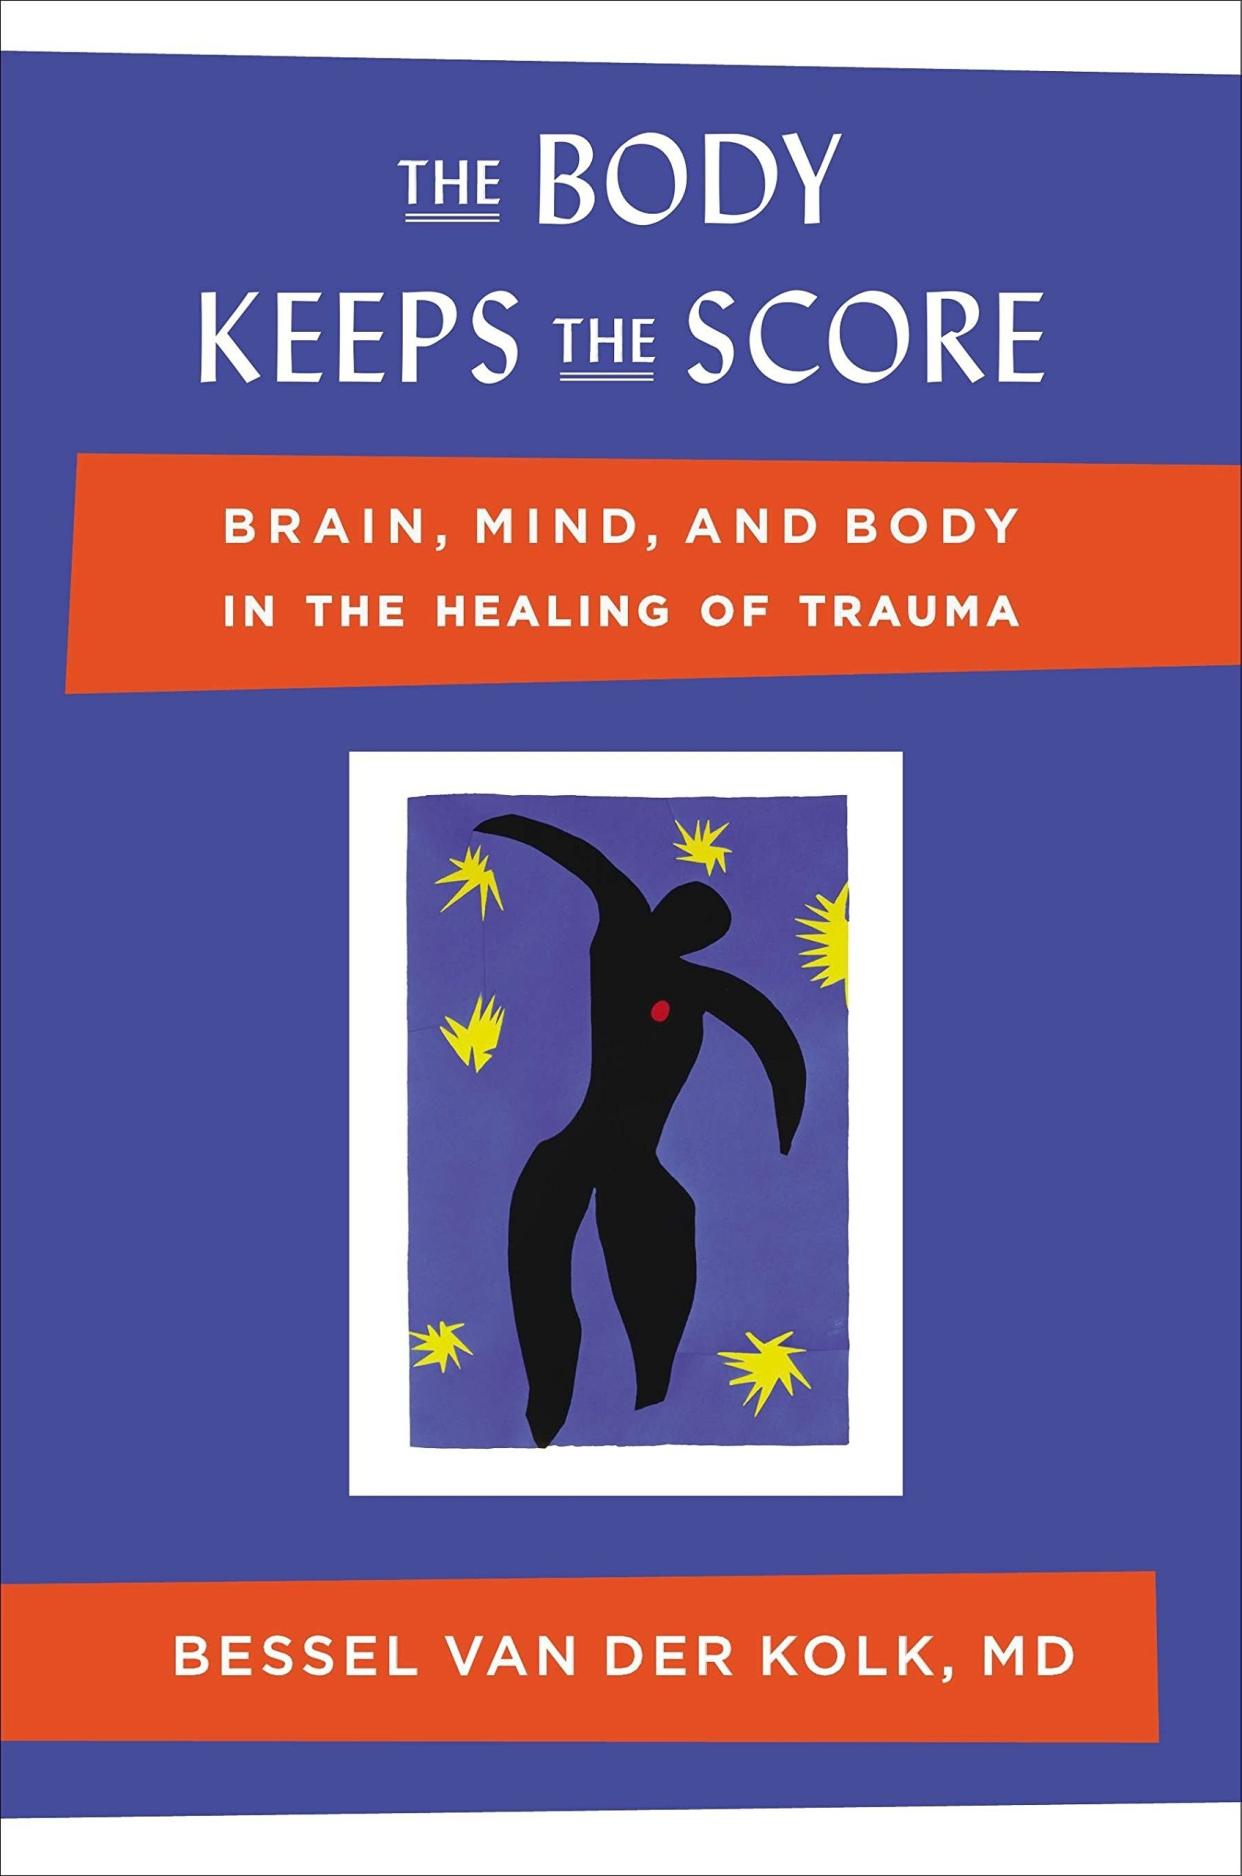 Book cover of "the body keeps score"